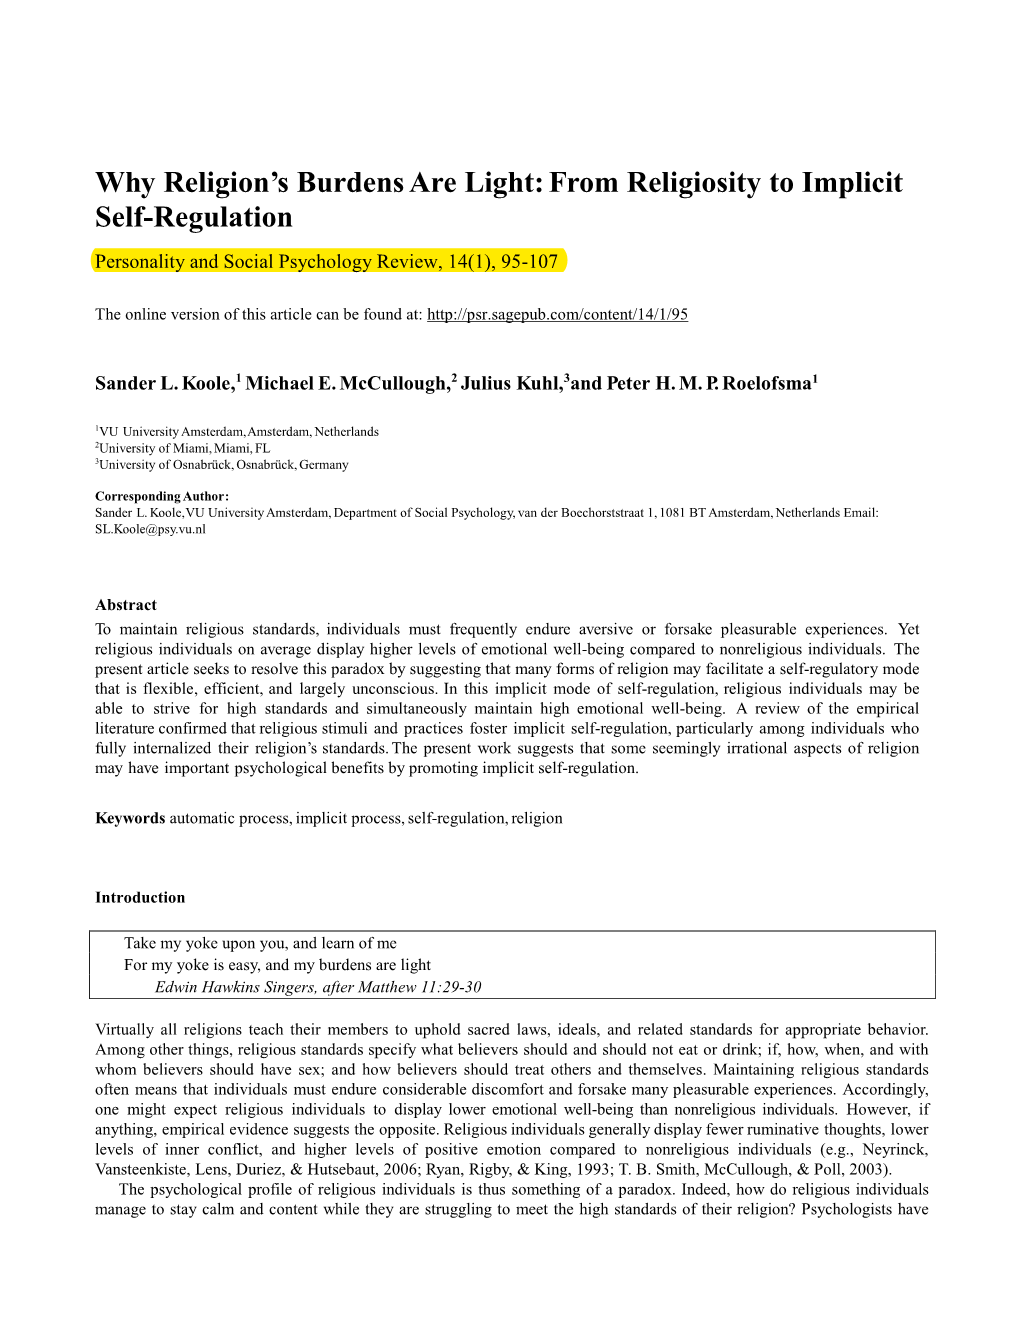 Why Religion's Burdens Are Light: from Religiosity to Implicit Self